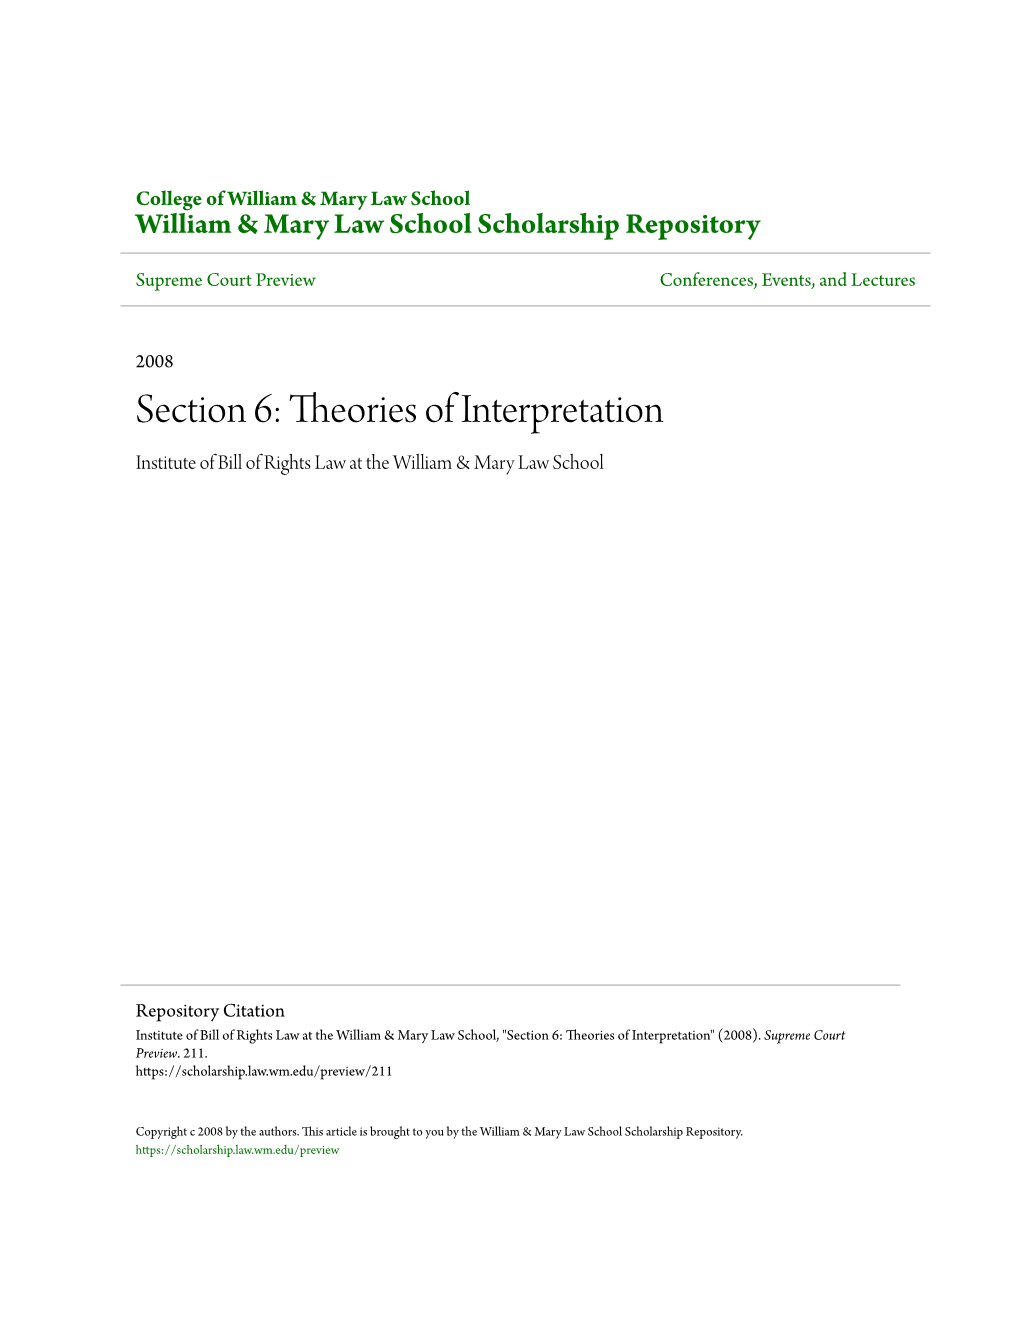 Theories of Interpretation Institute of Bill of Rights Law at the William & Mary Law School